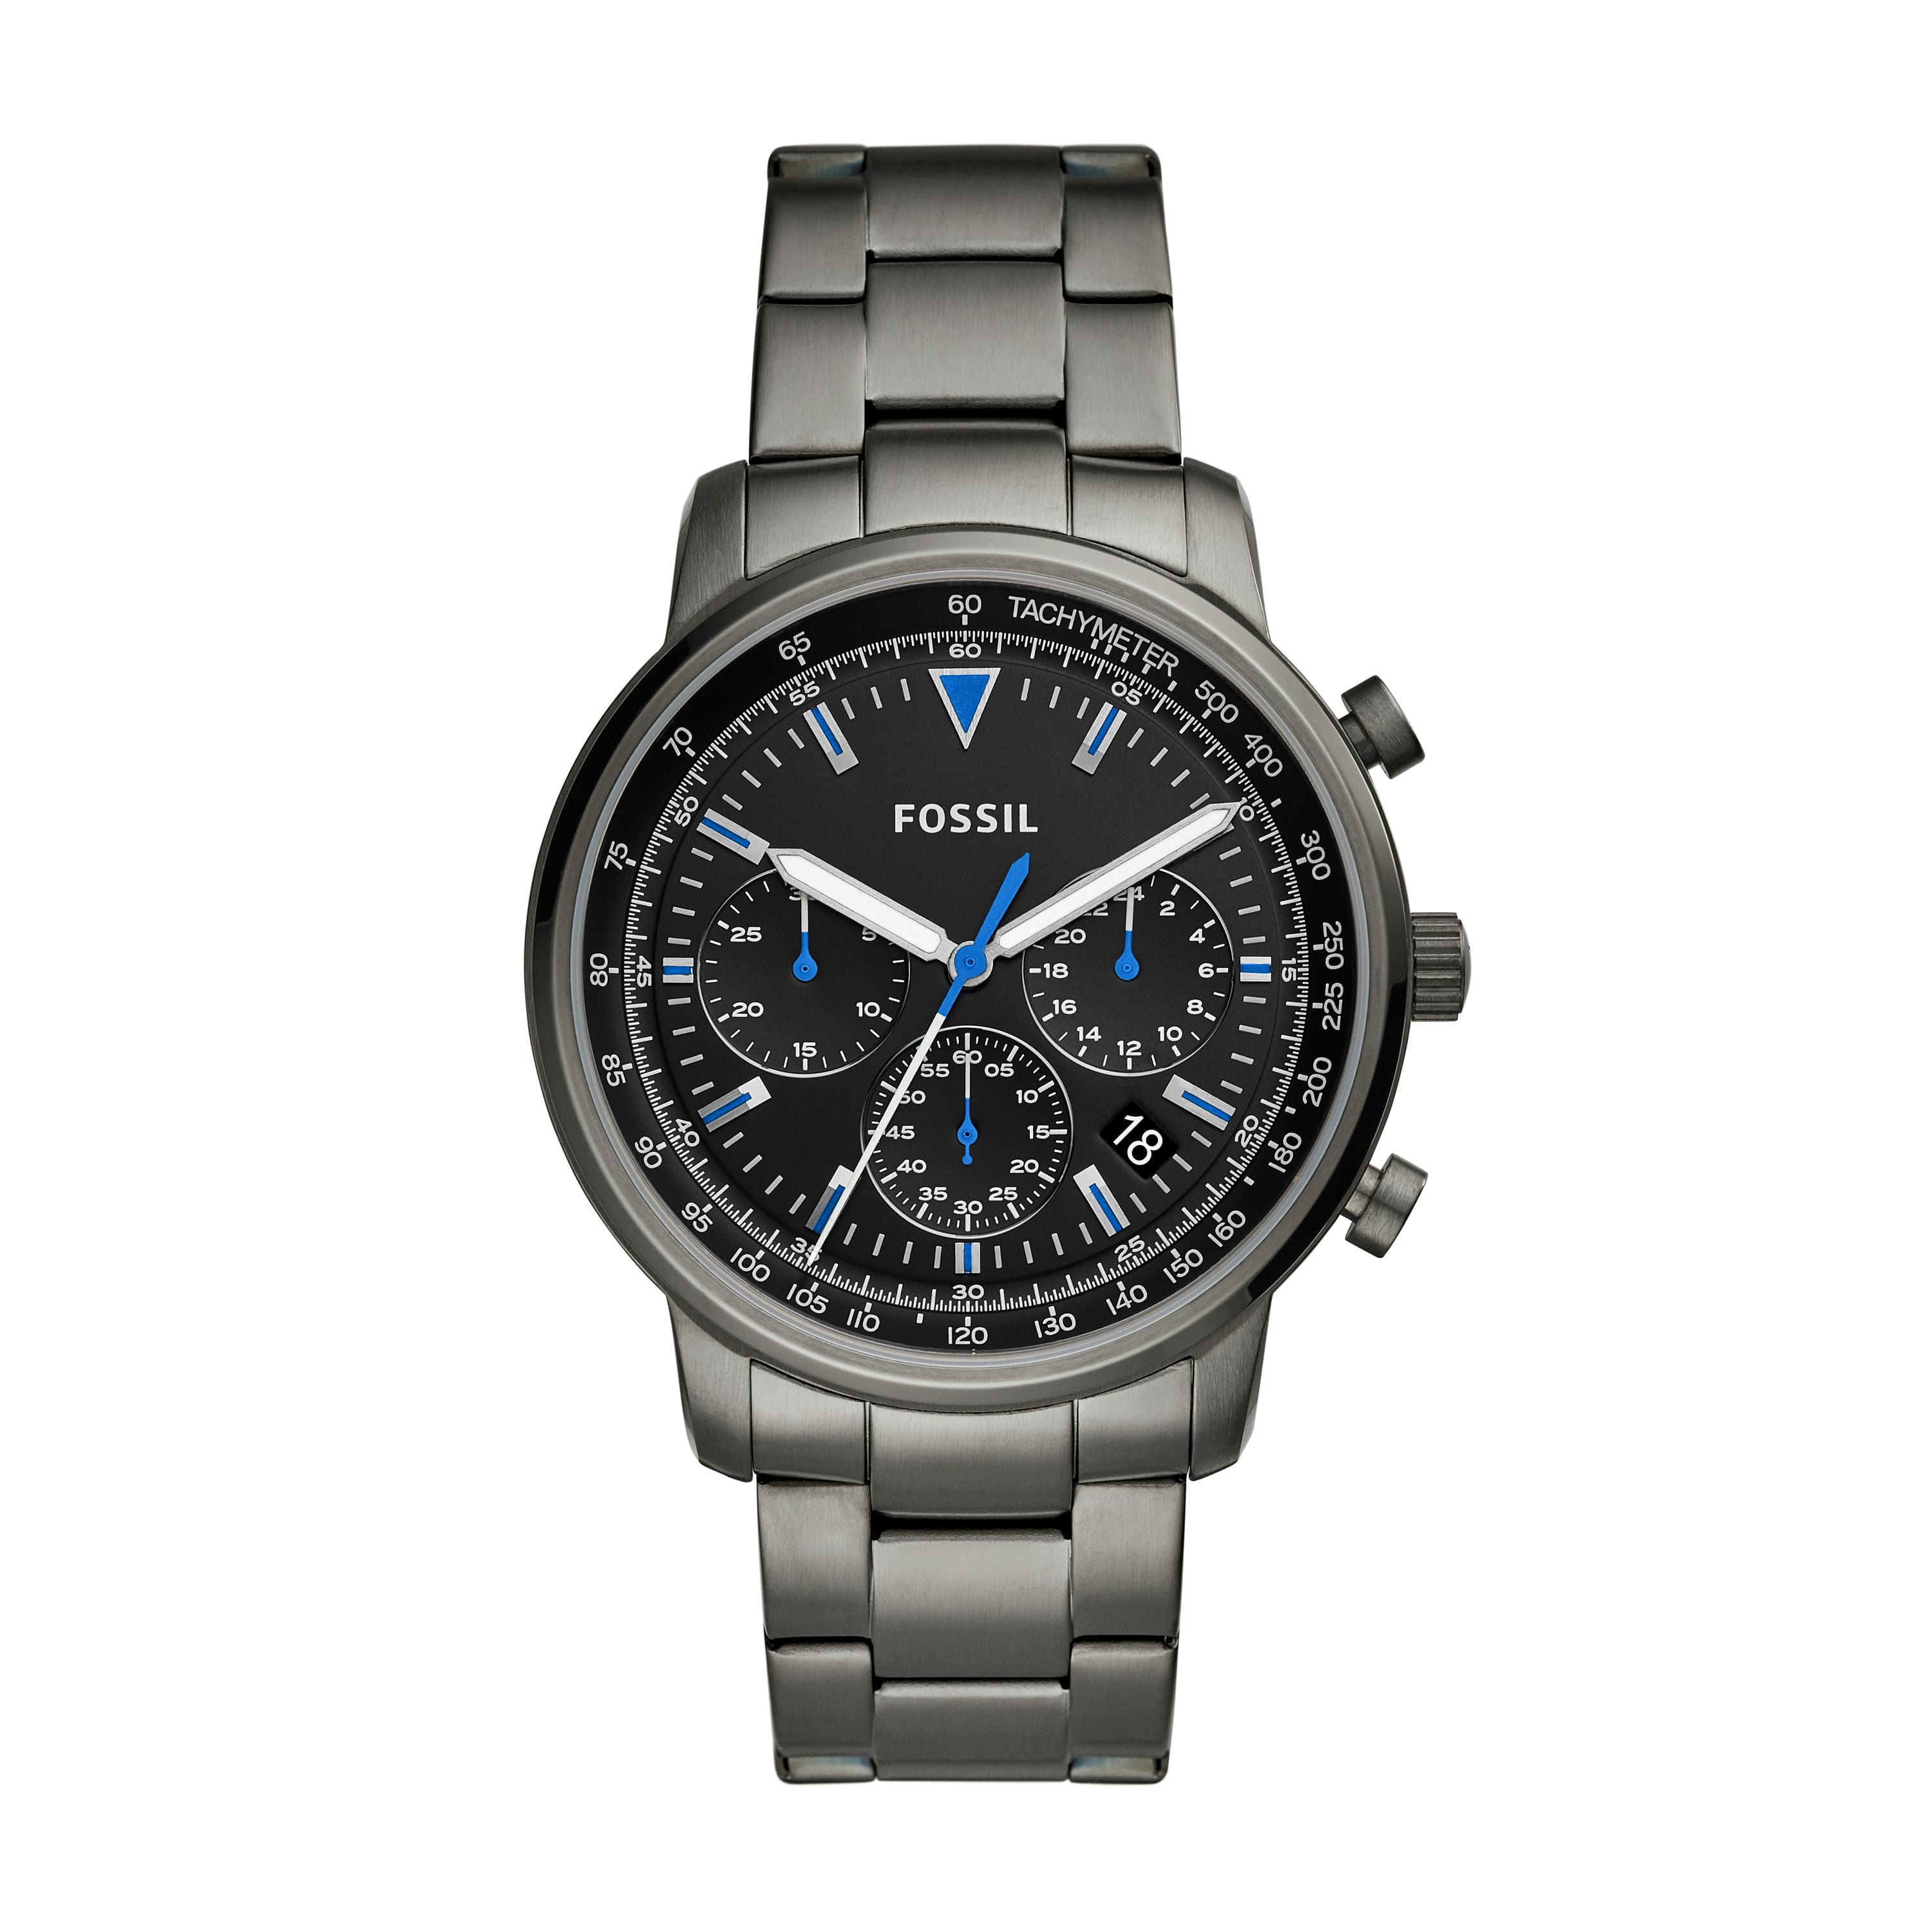 Fossil - Fossil Men's Goodwin Smoke Stainless Steel Chronograph Watch Fossil Smoke Stainless Steel Watch